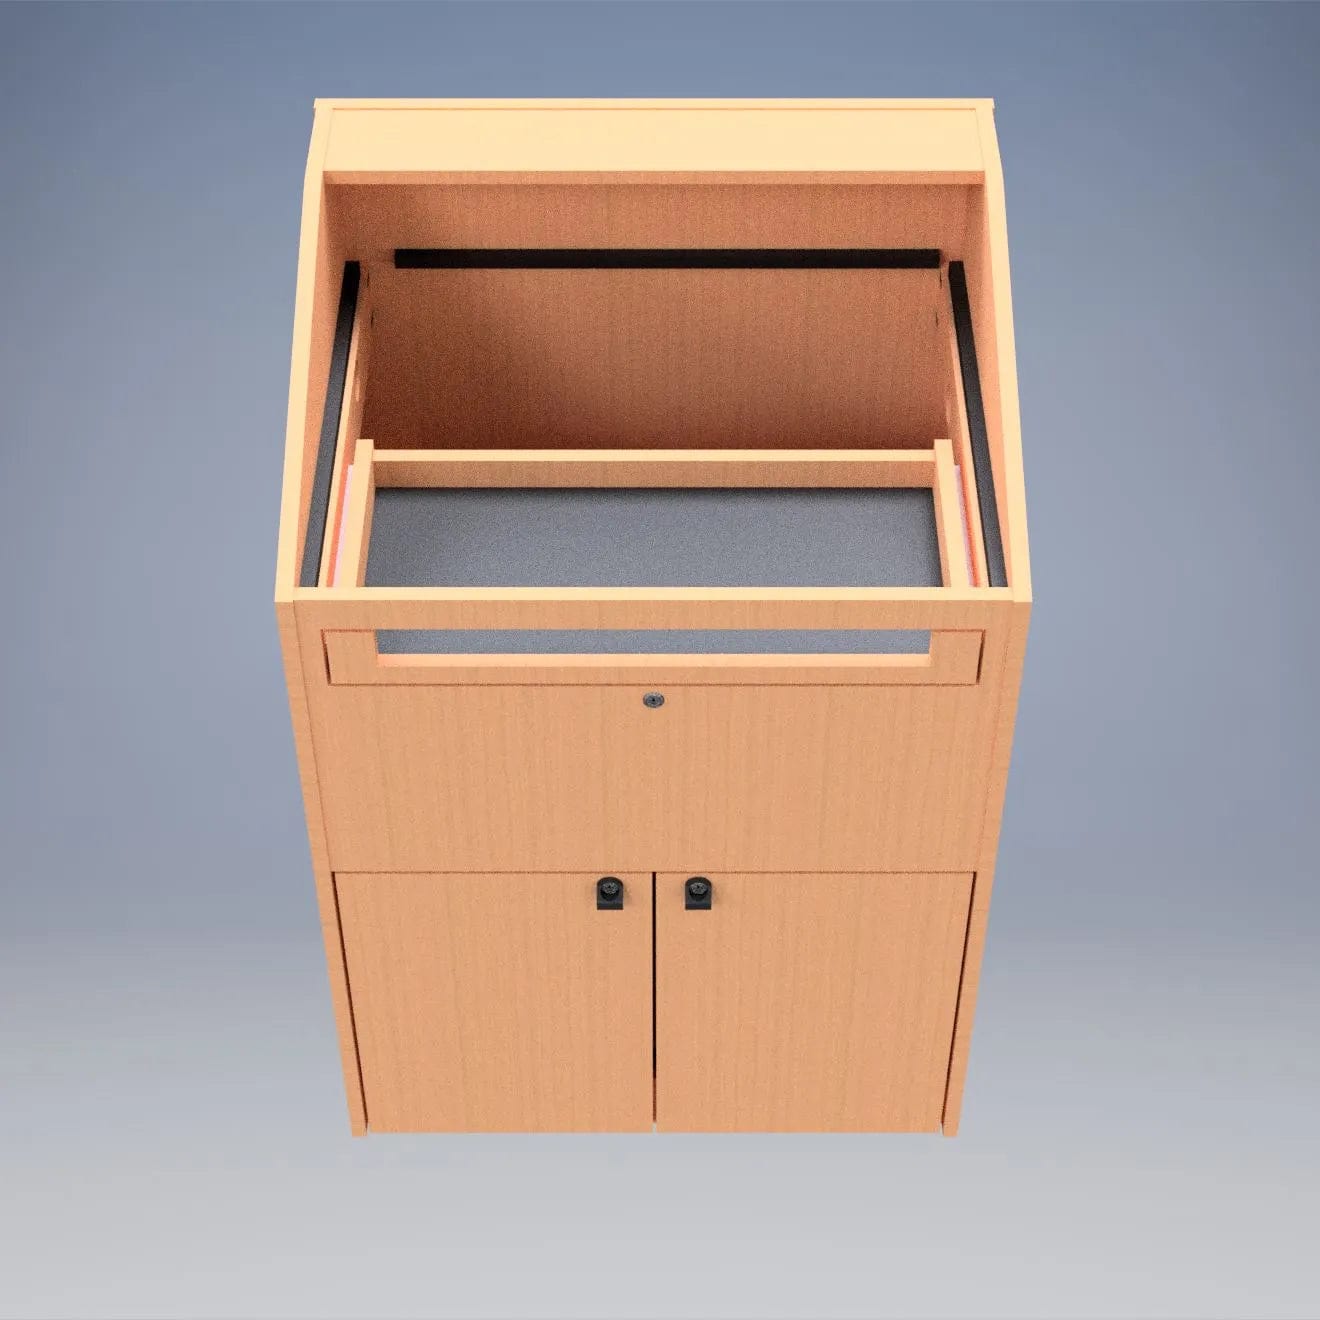 sound craft multimedia lectern with work surface removed